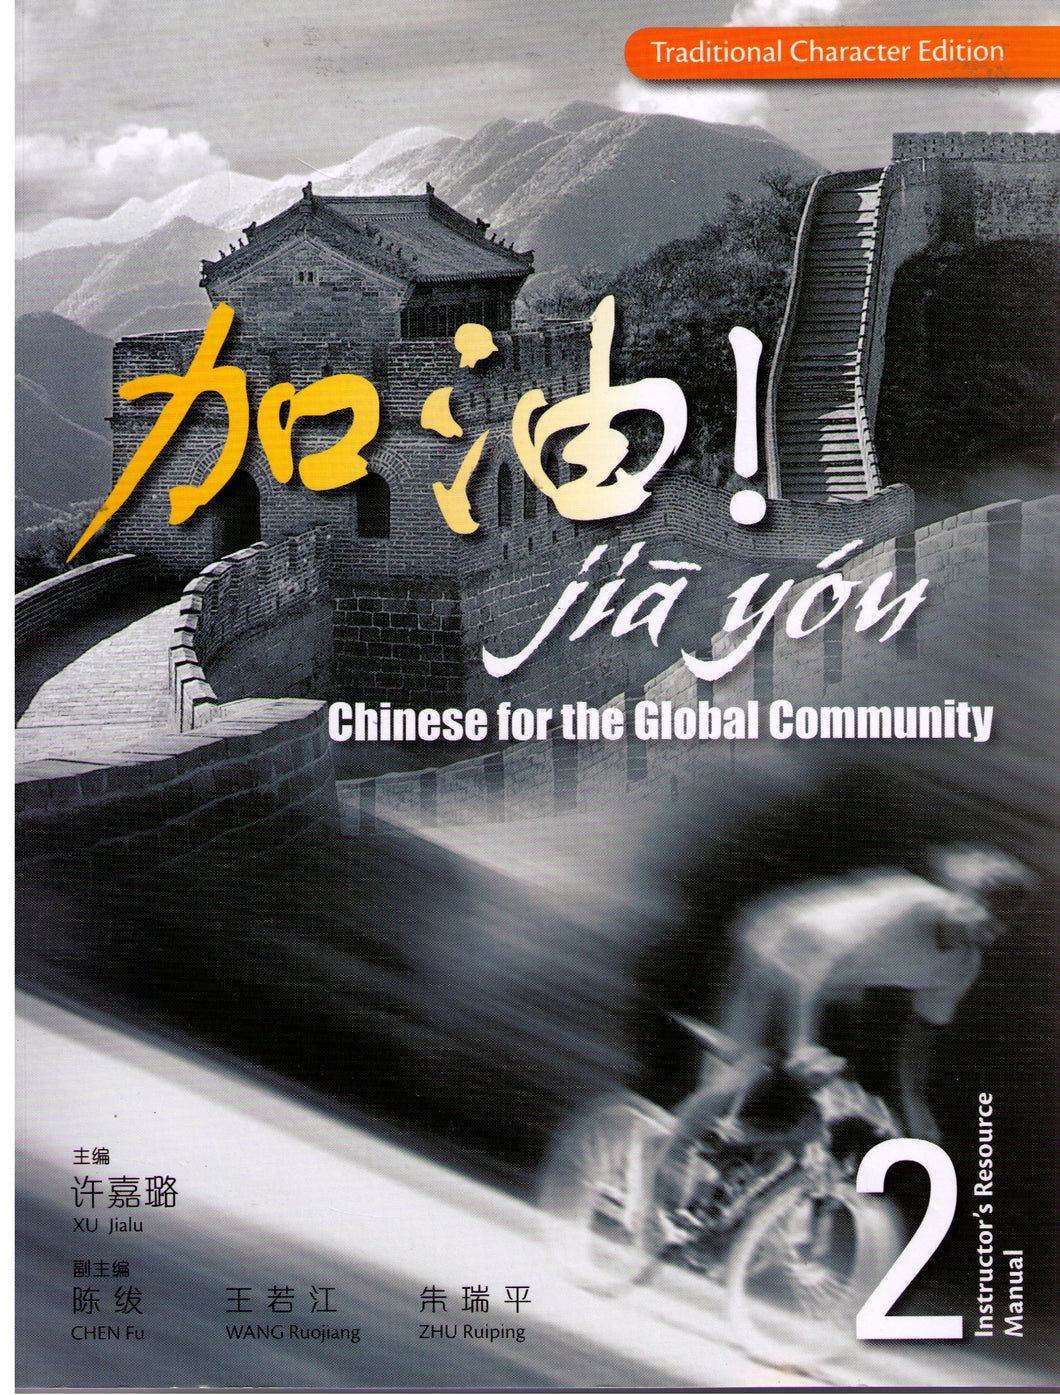 Jia You! Instructor's Resource Manual 2 with Audio CD & CD-ROM (Traditional Character Edition)  加 油